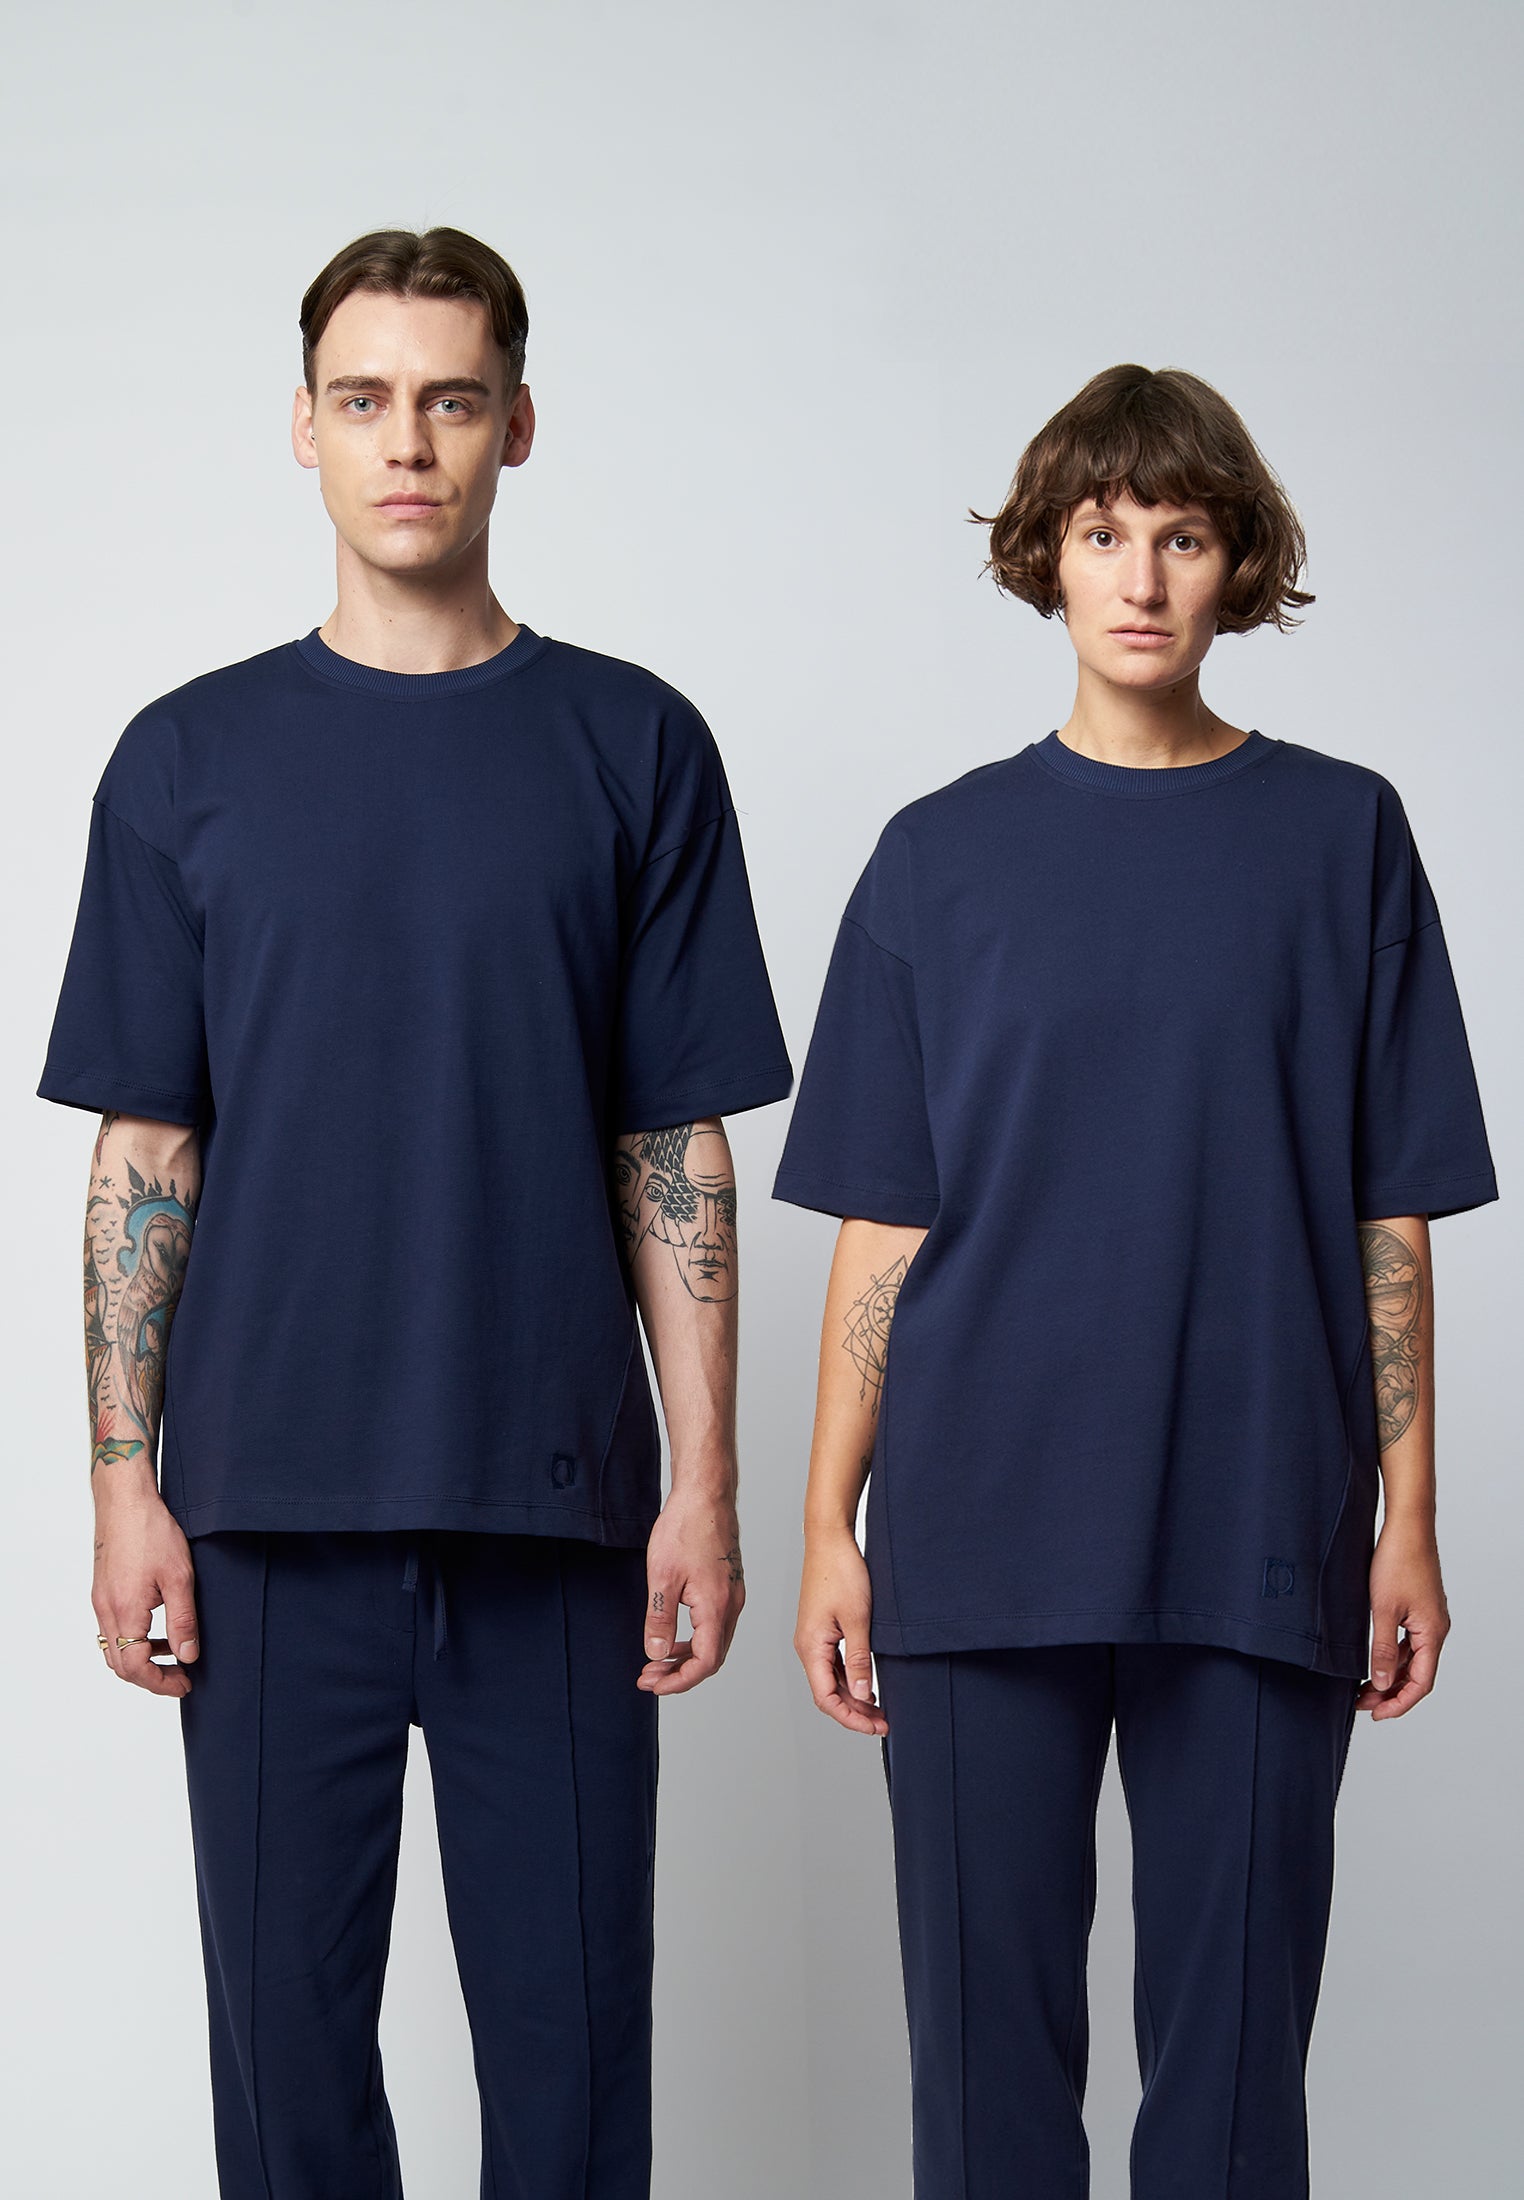 Project Cece | Organic cotton oversized t-shirt MALIN in navy blue